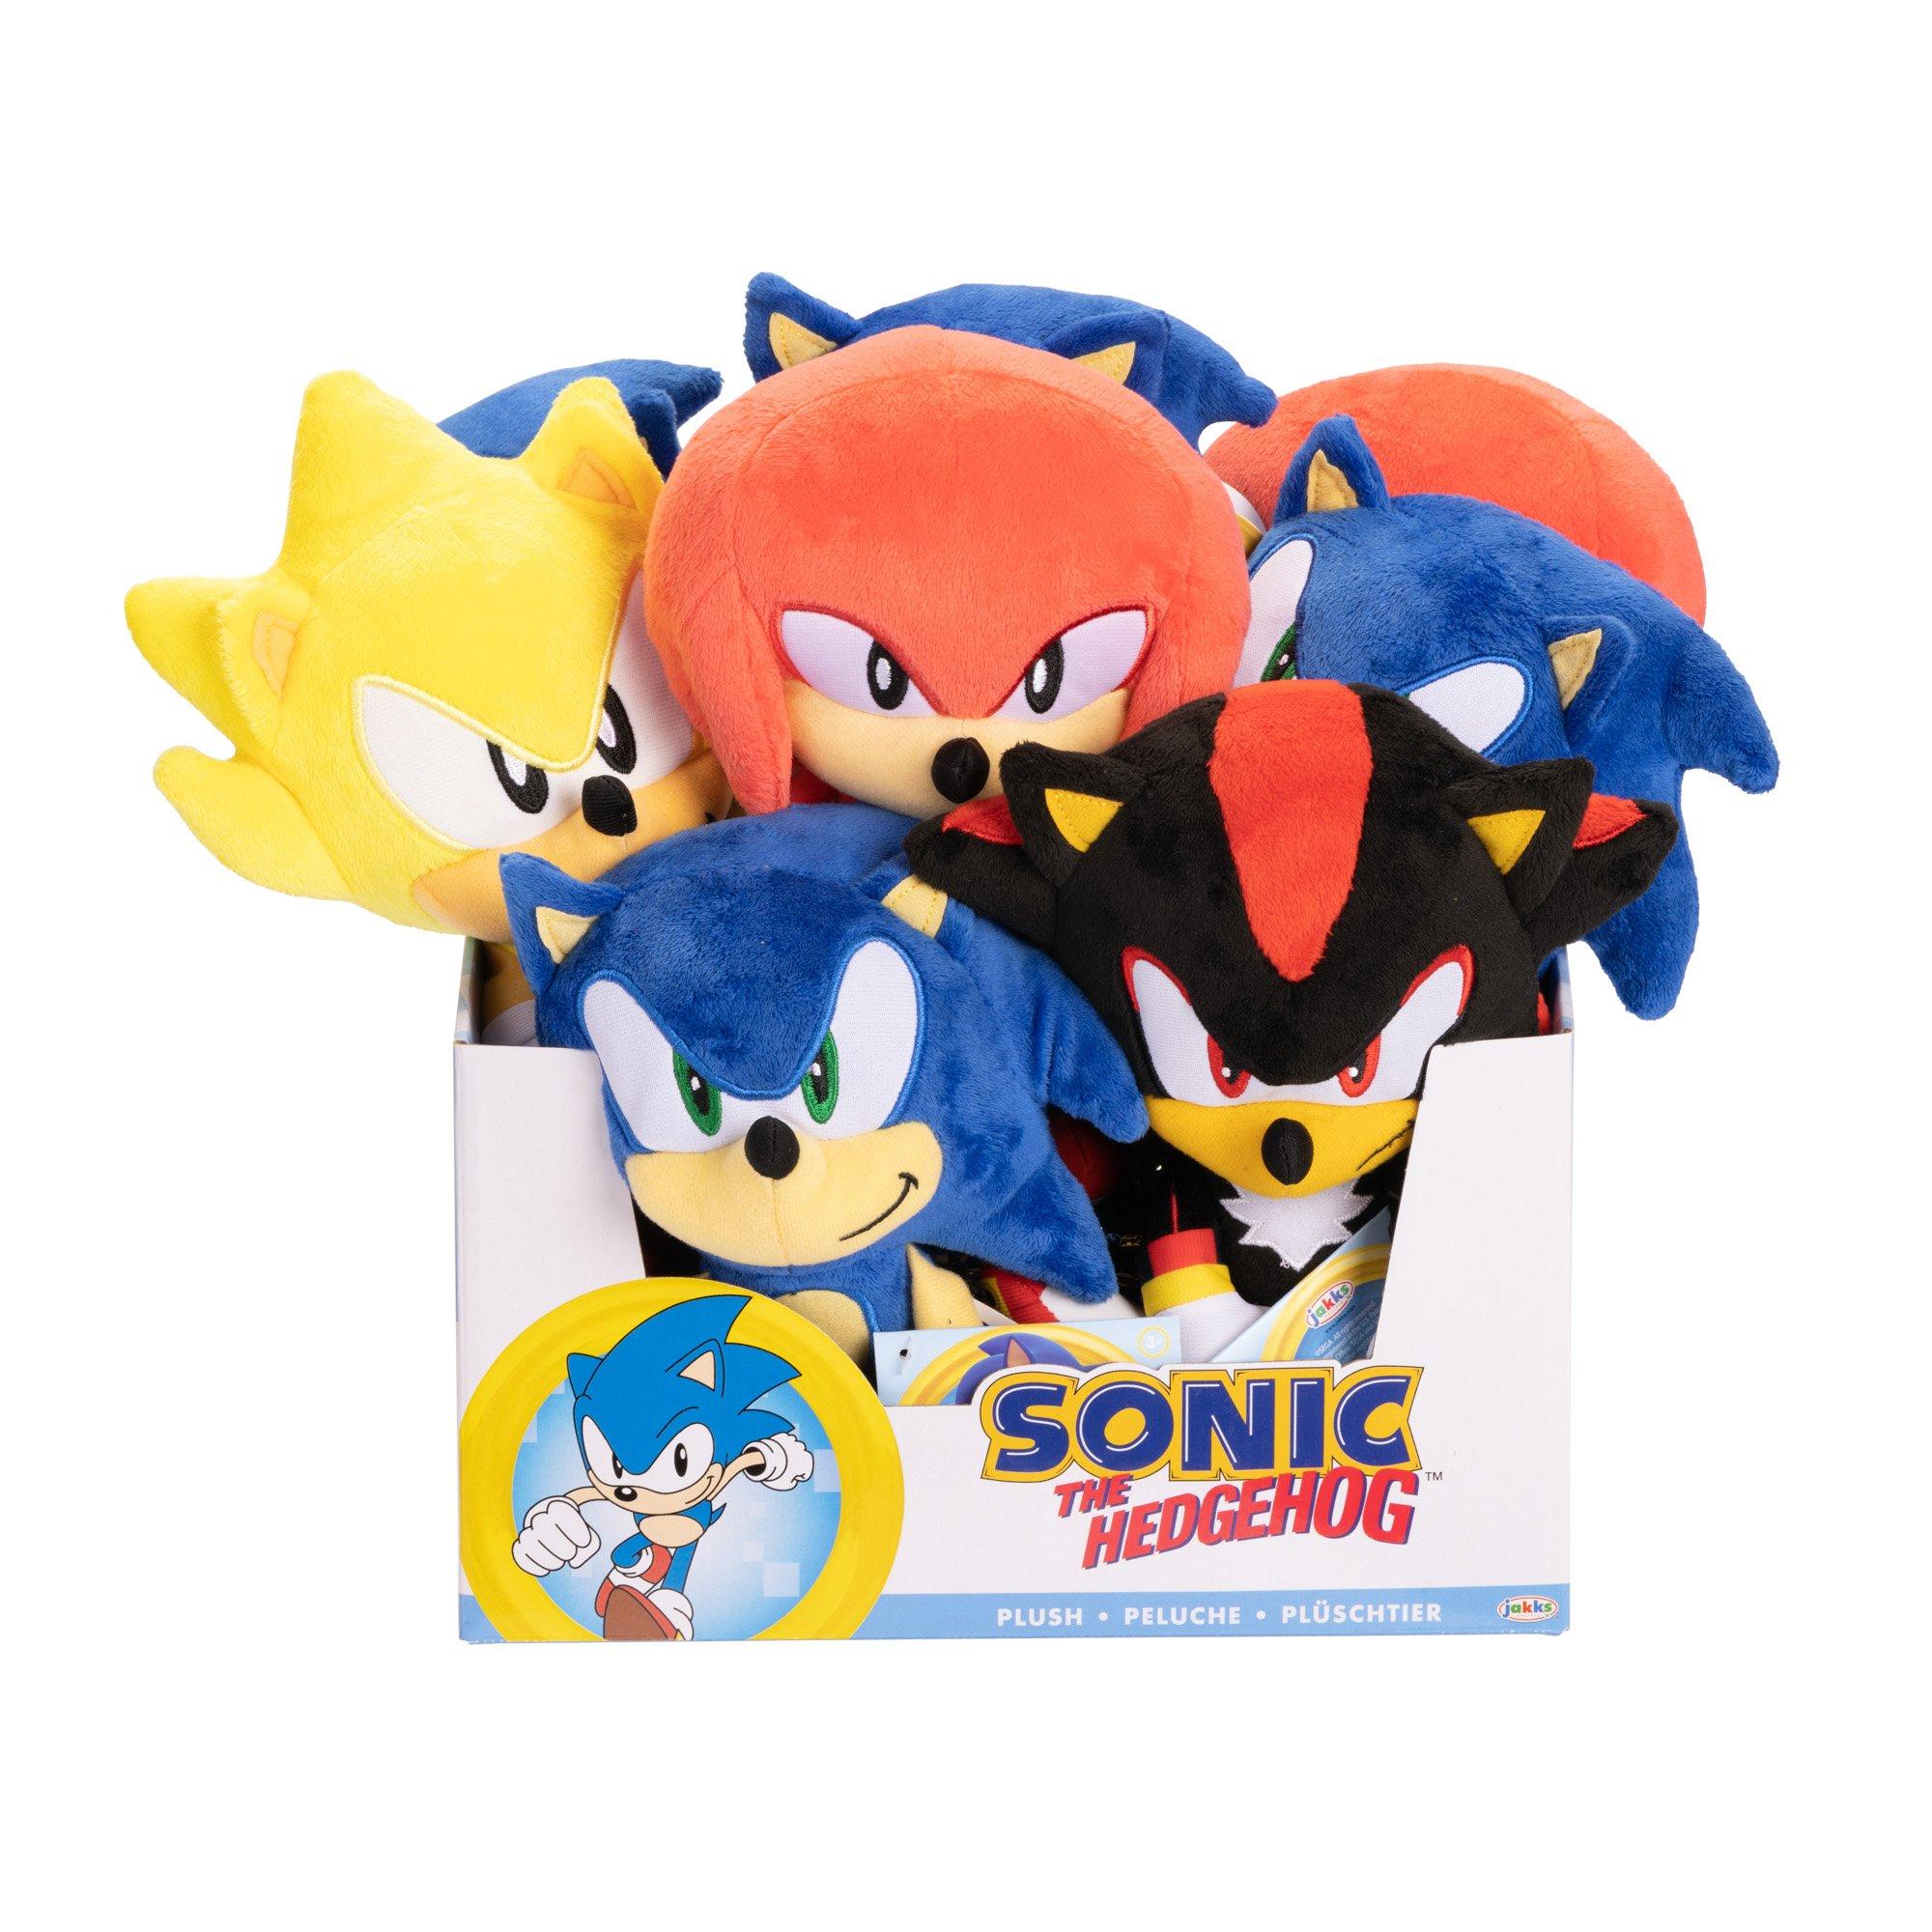 Jakks Pacific Sonic the Hedgehog 9-in Plush (Styles May Vary